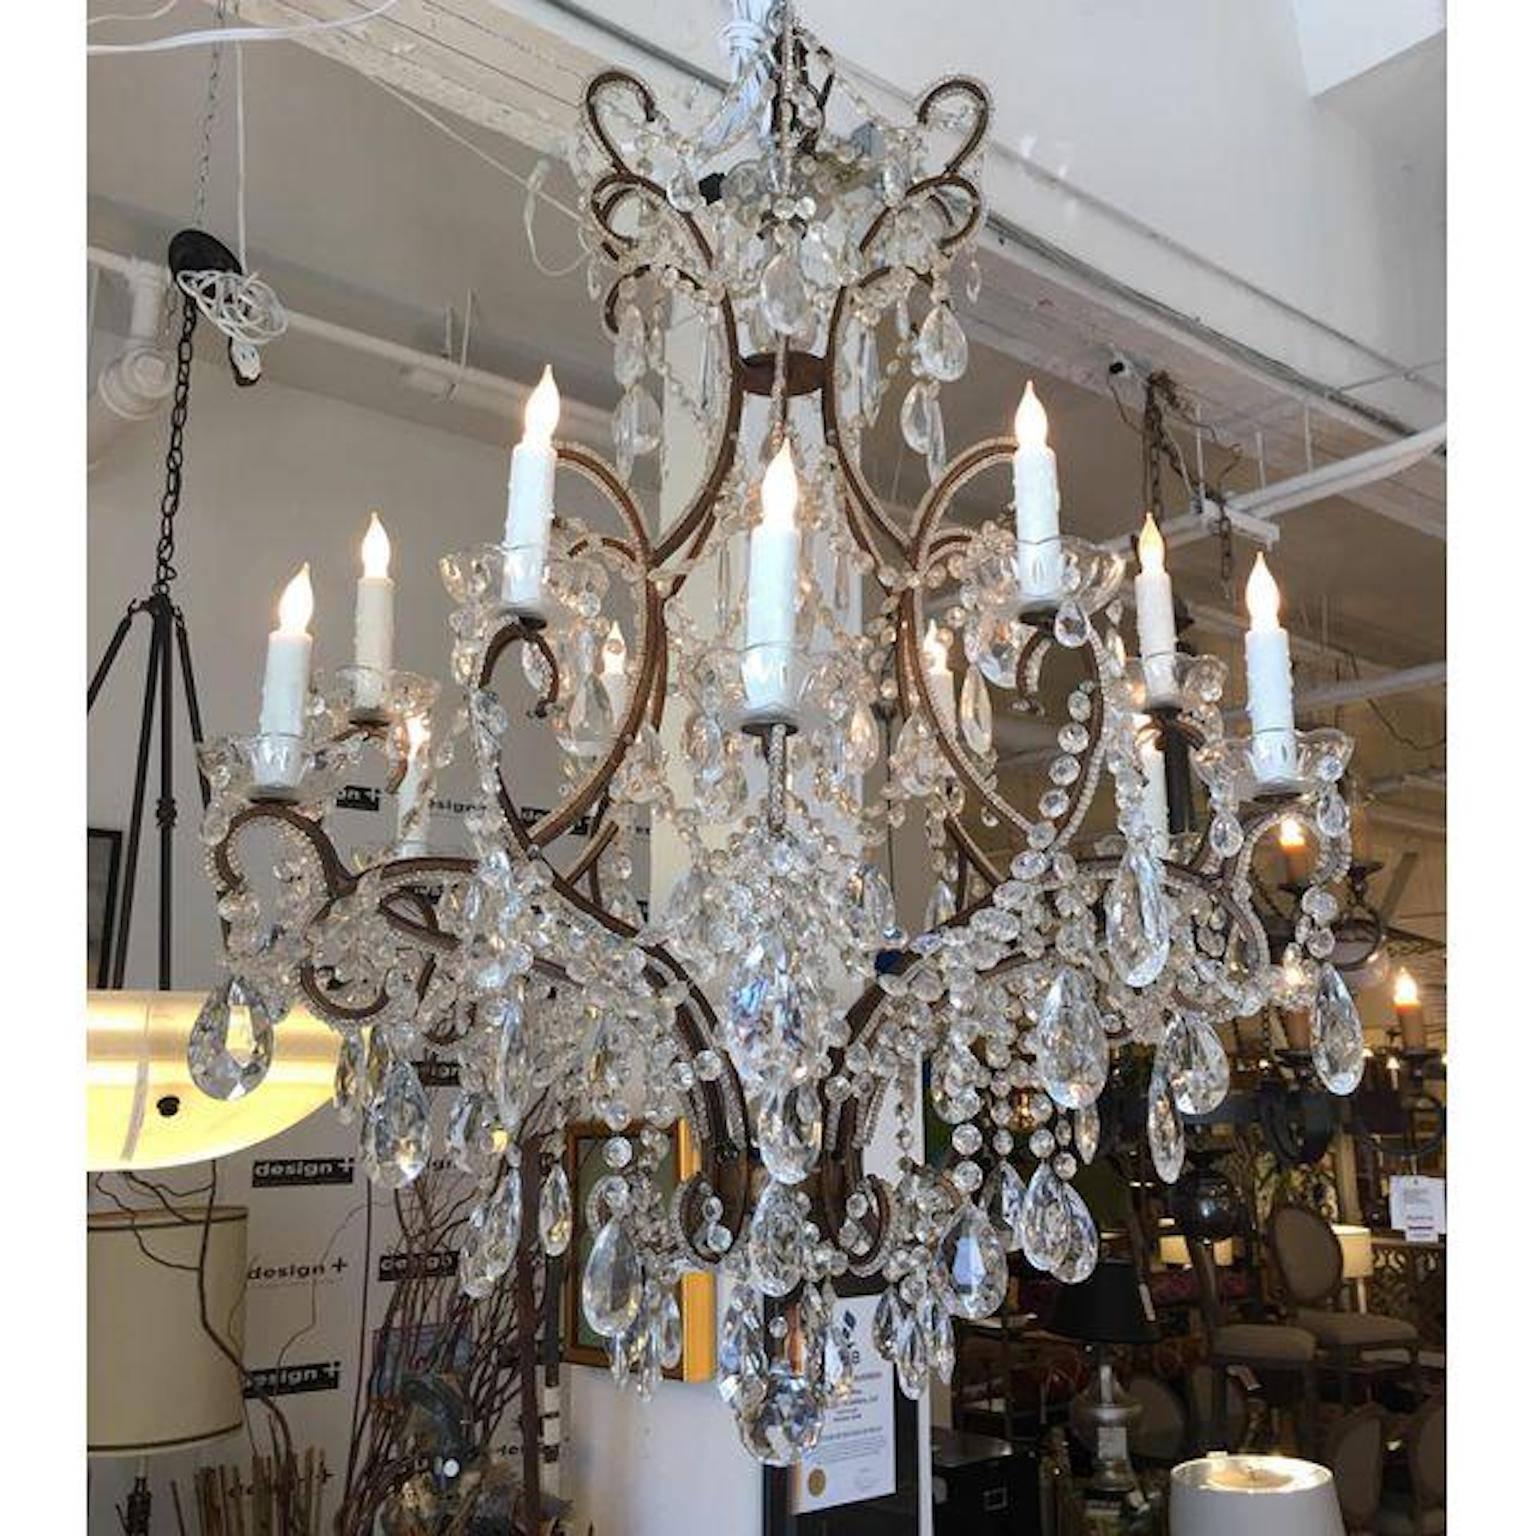 A first quarter Century French Antique beaded Chandelier, gilded and brass twelve-light chandelier in the Louis XV Style, profusely with cut beaded chains, faceted drops in four sizes facet cut spears, the frame outlined in glass bead chains through